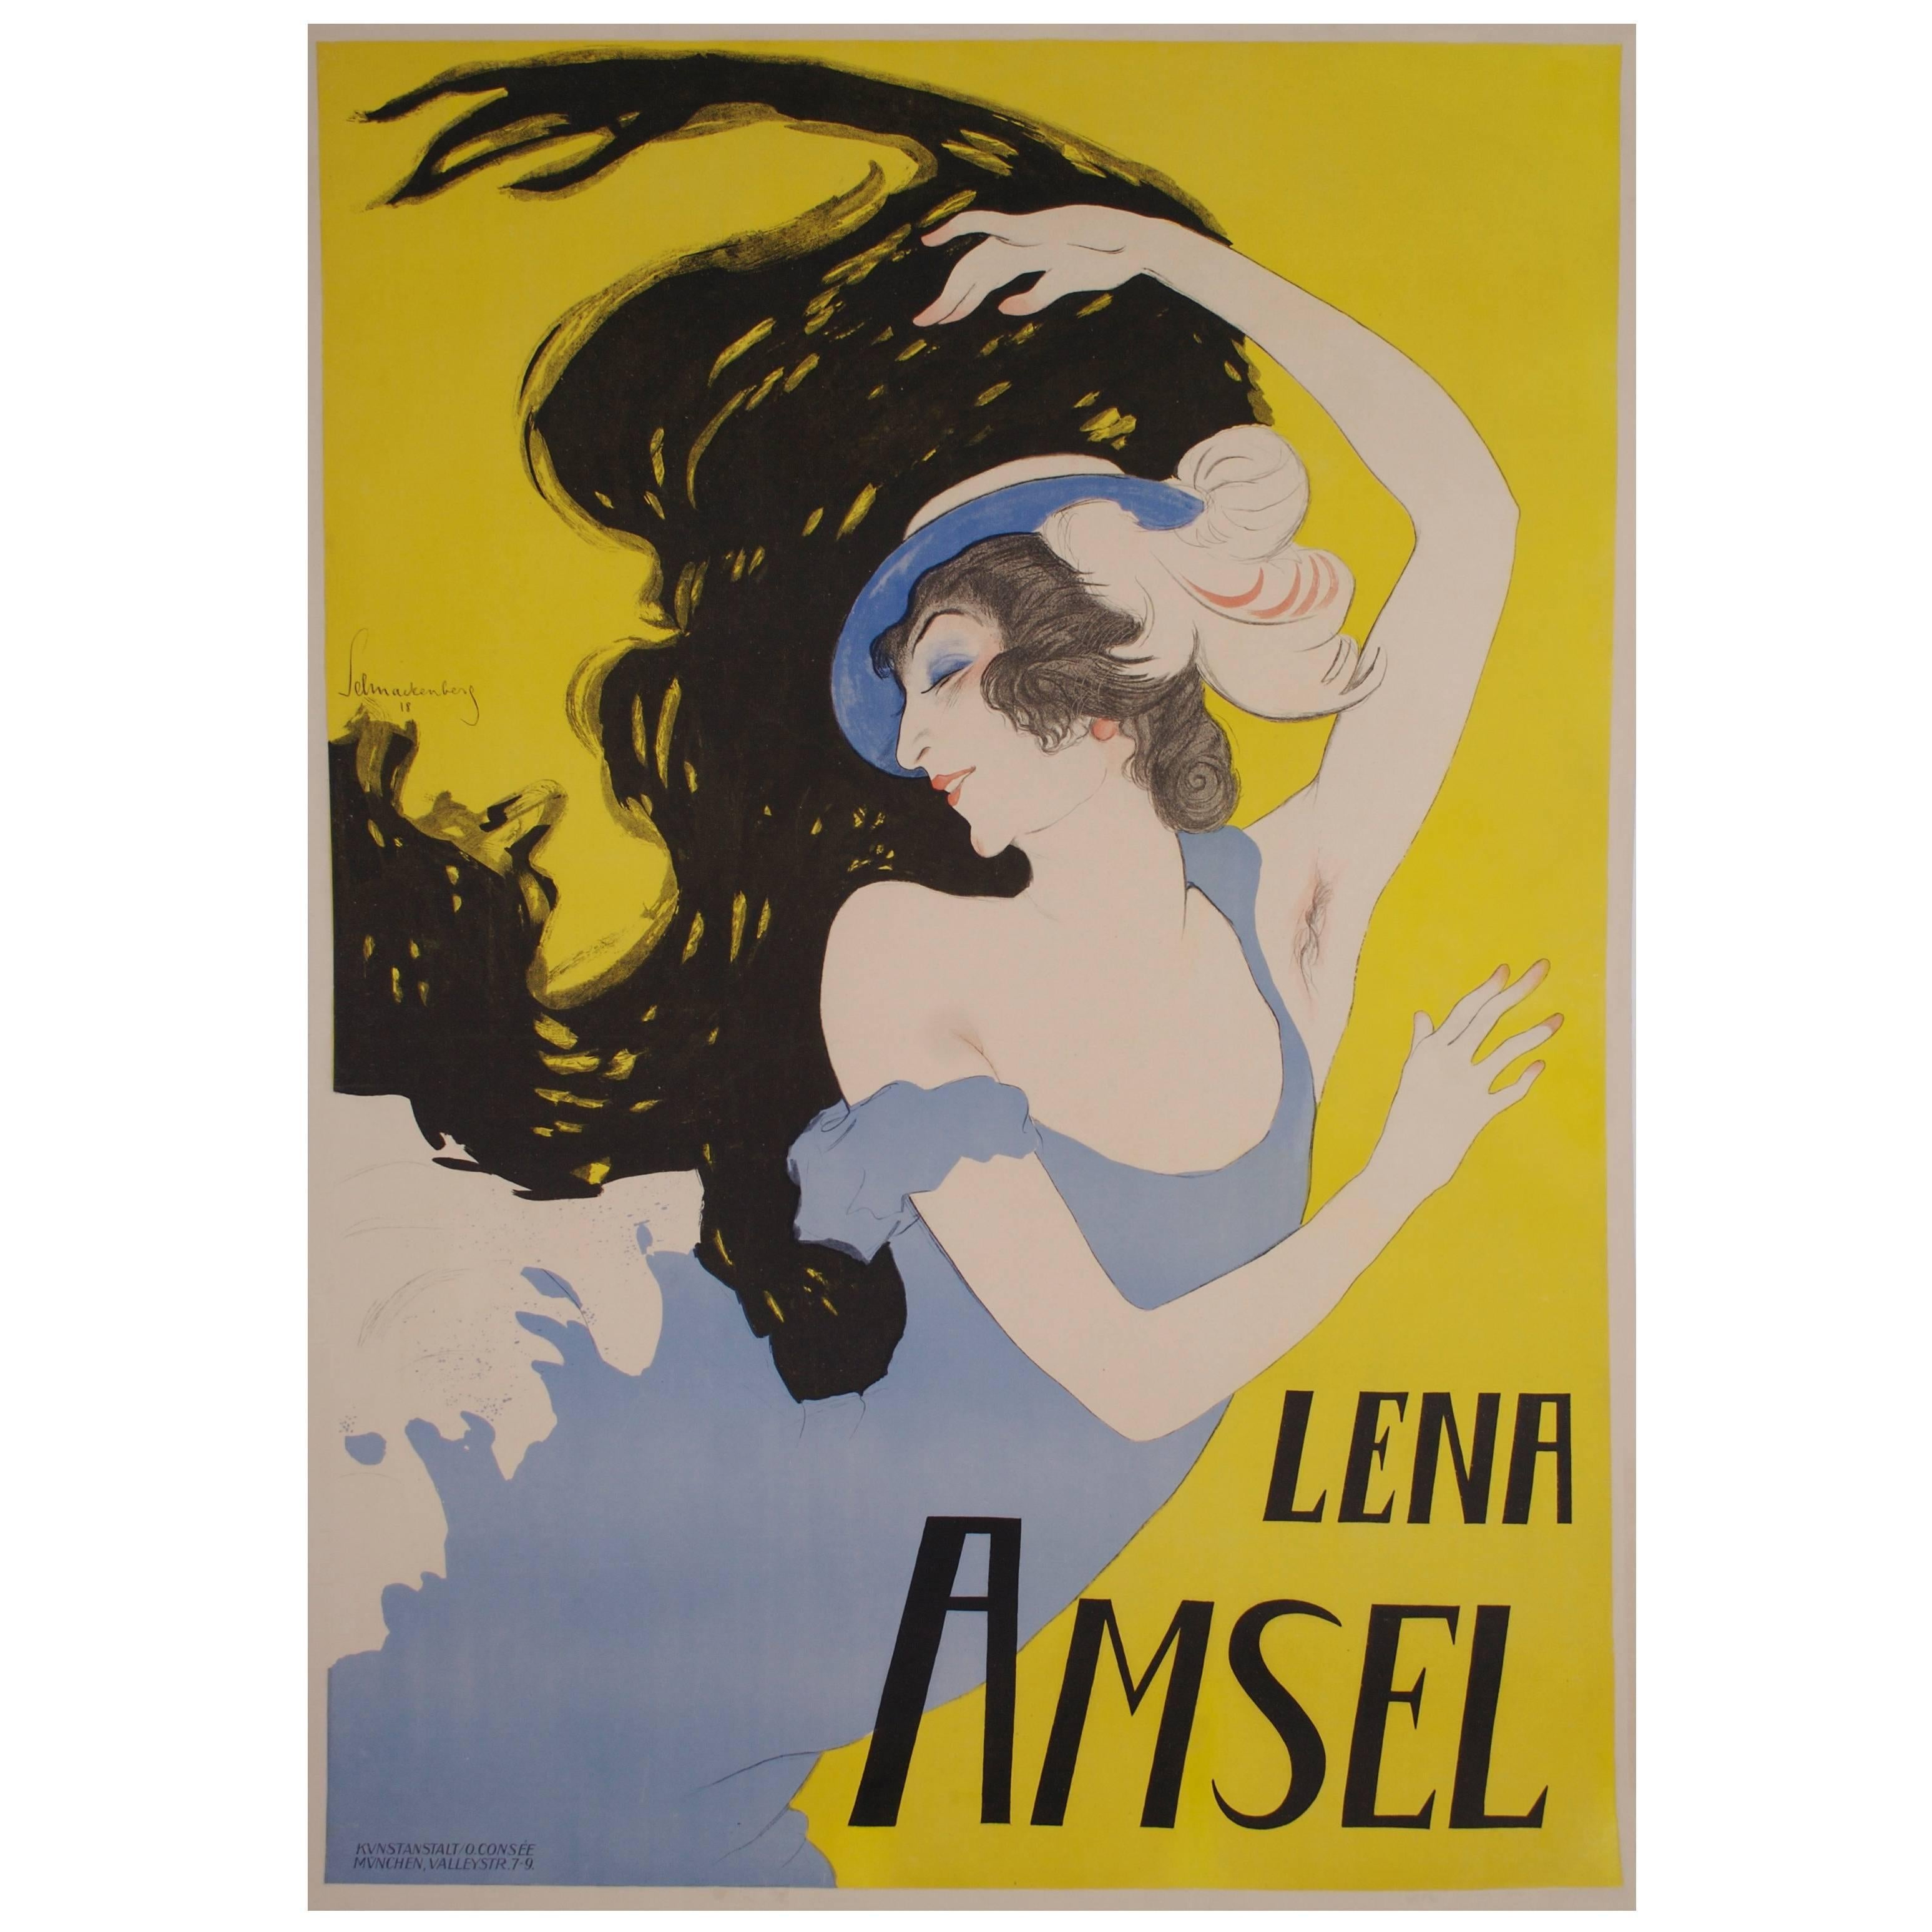 Rare original German theatre poster by Walter Schnackenberg, 1918. This is a full size (49 1/4&quot; x 33 7/8&quot;) original stone lithograph created for a performance by Lena Amsel (1898-1929), a Polish born actress and dancer who was popular in